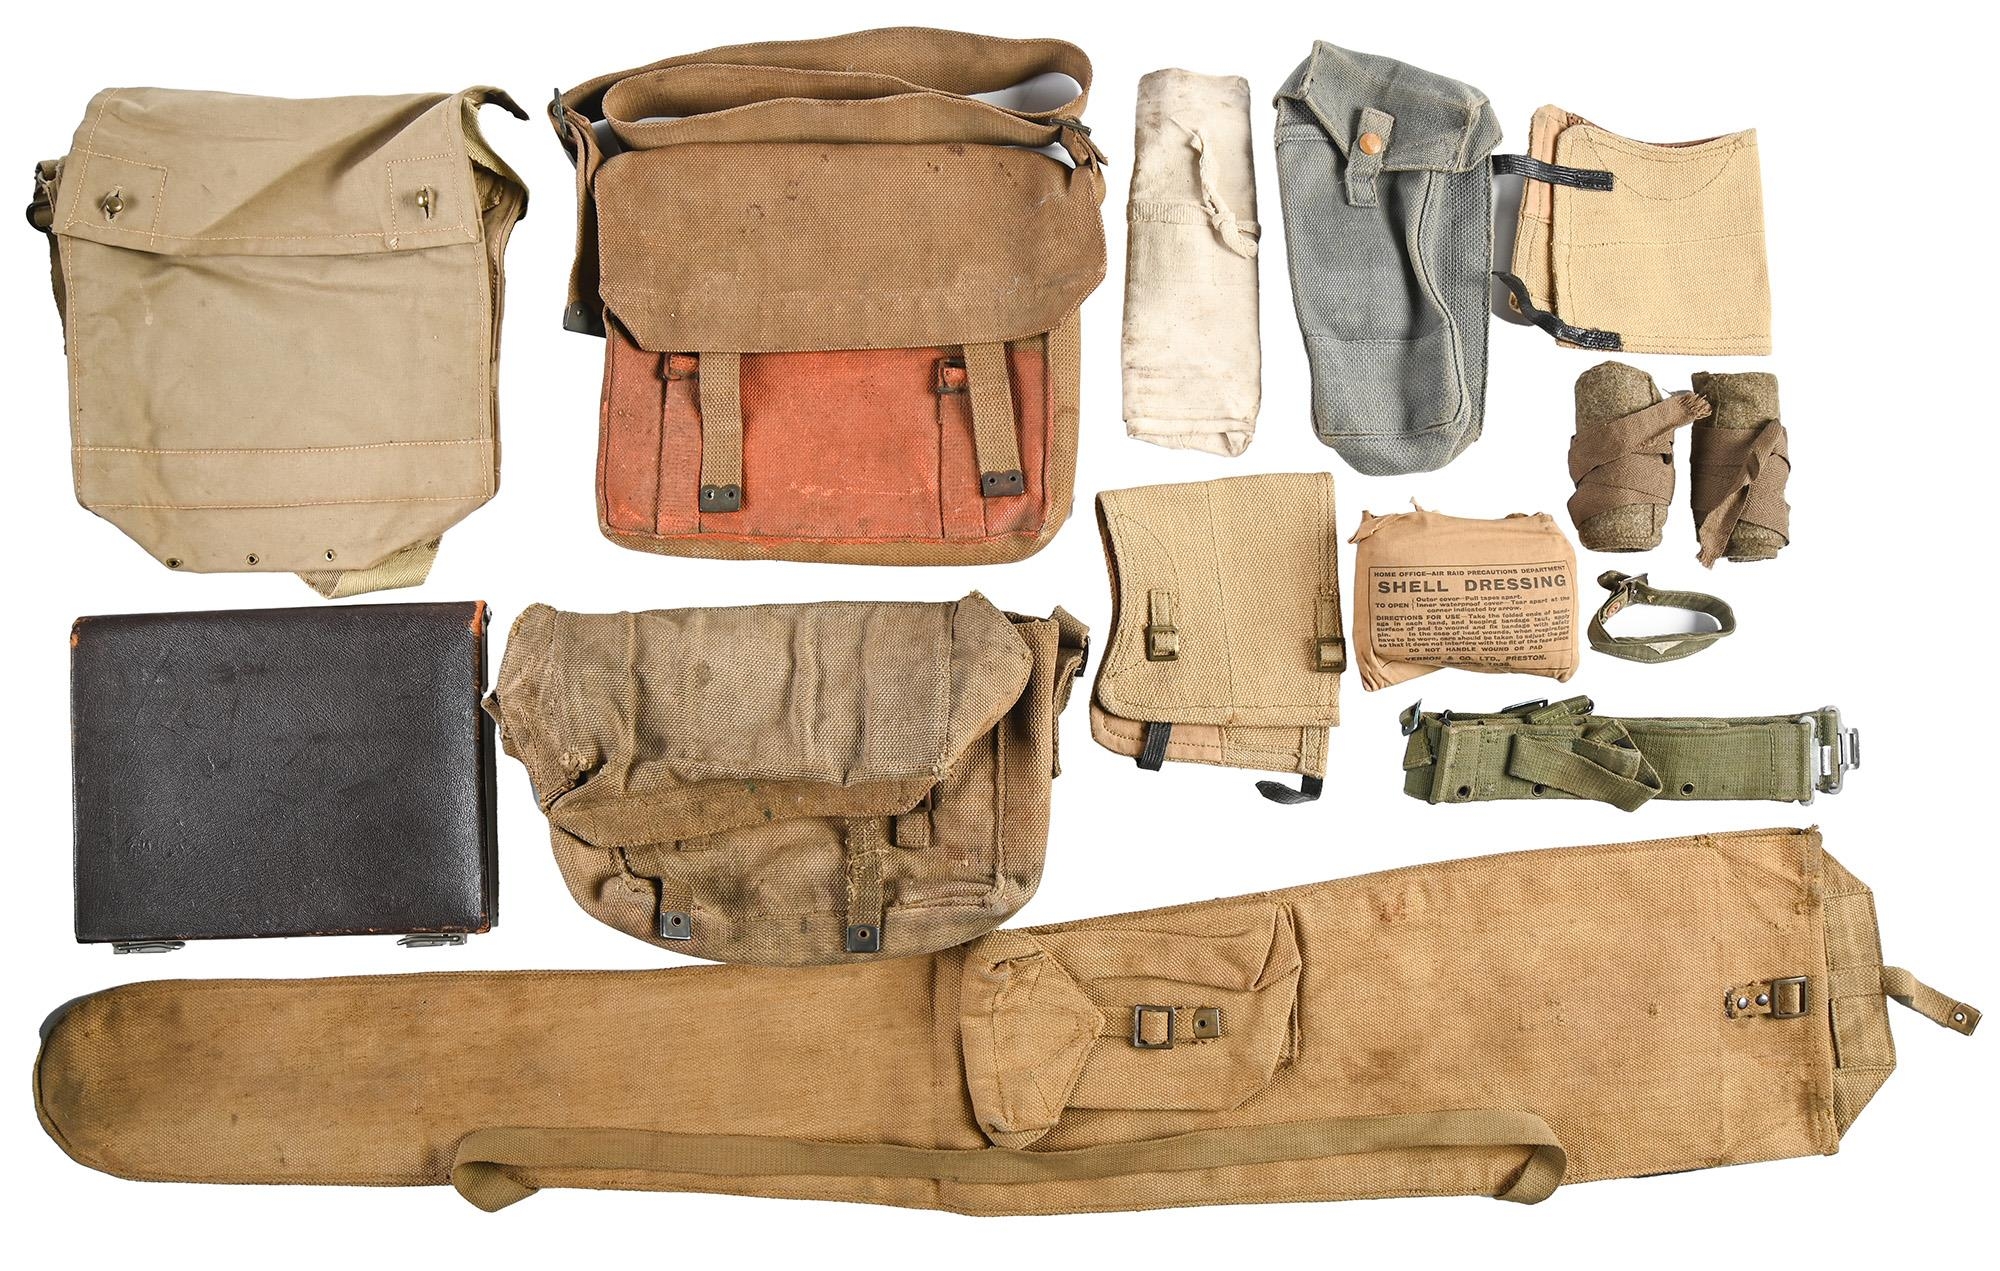 Miscellaneous WWII British Army clothing, a WWI canvas satchel and a plated metal framed leather